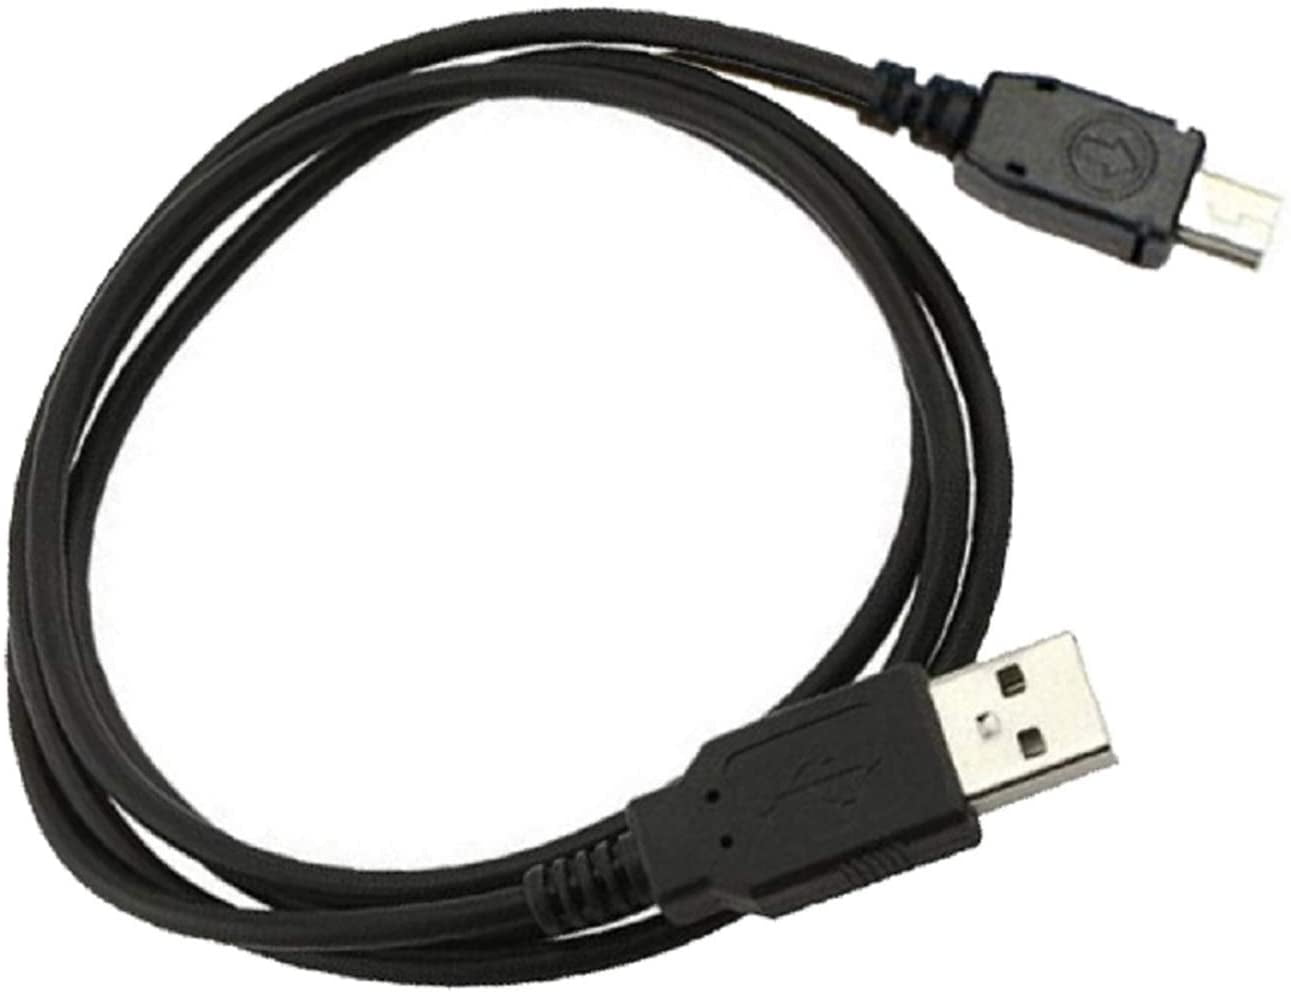 90cm USB Black Charger Cable for Motorola MBP161TIMER Baby's Unit Baby Monitor